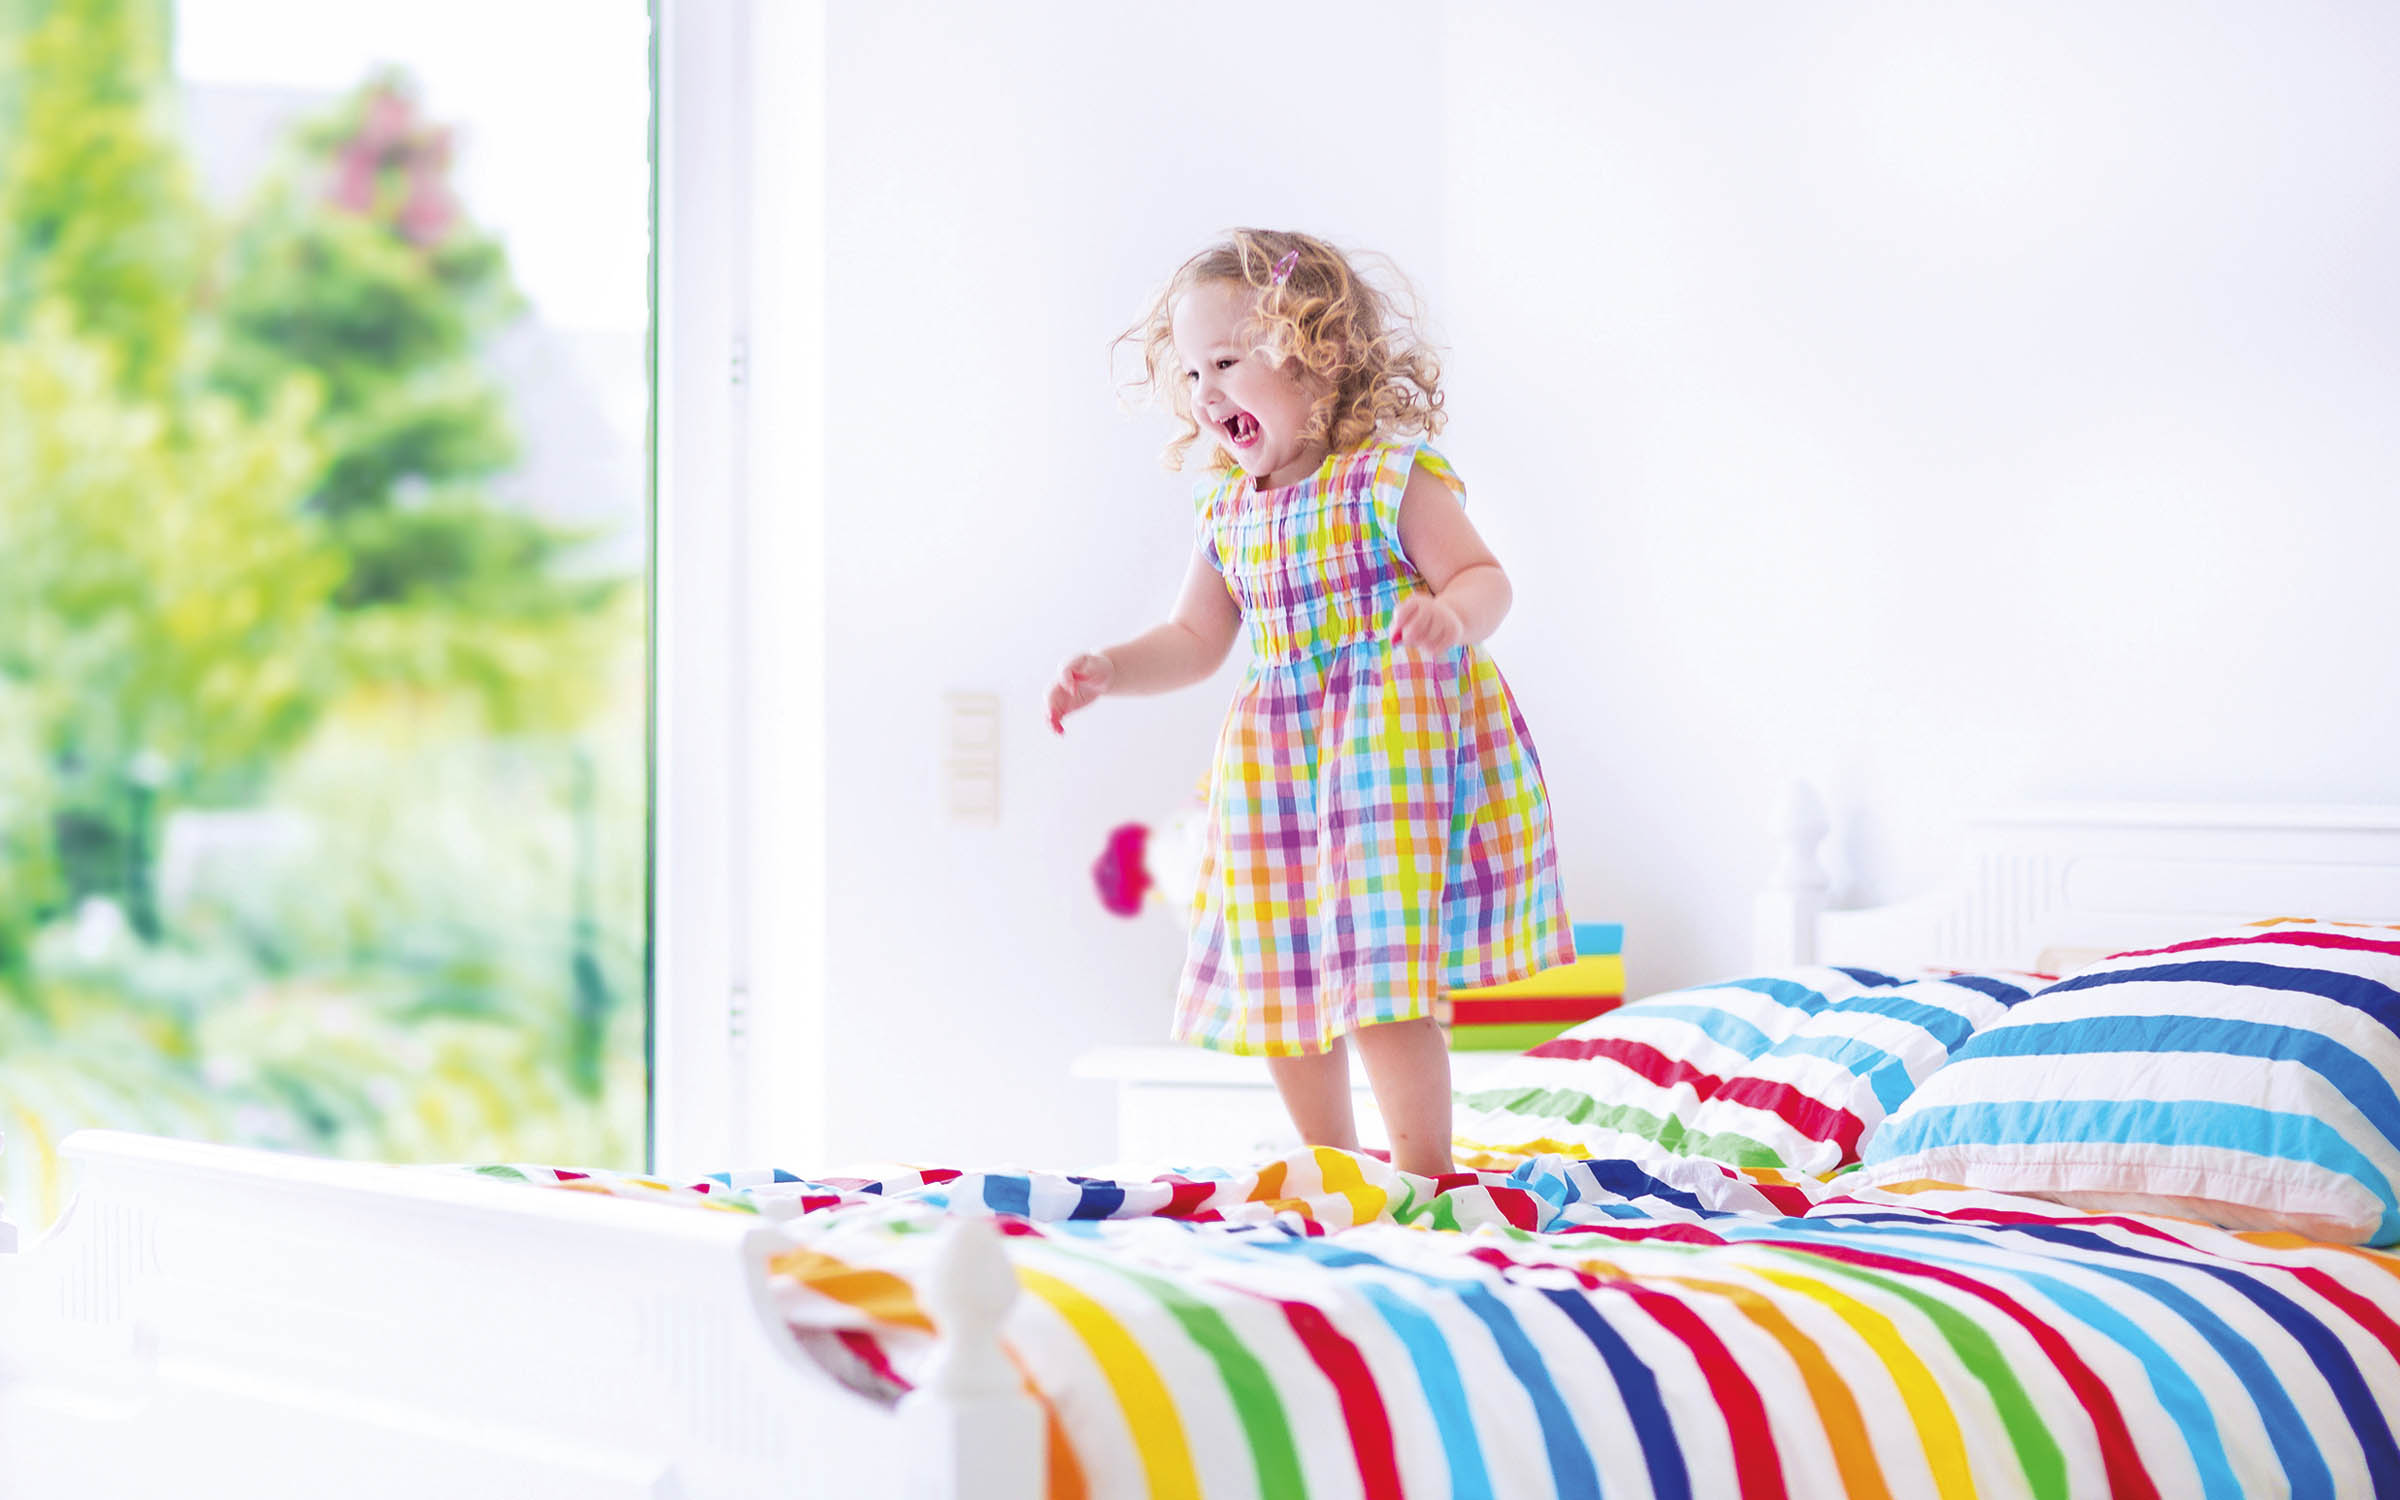 Child in coloured dress jumping on a colourful striped bed.